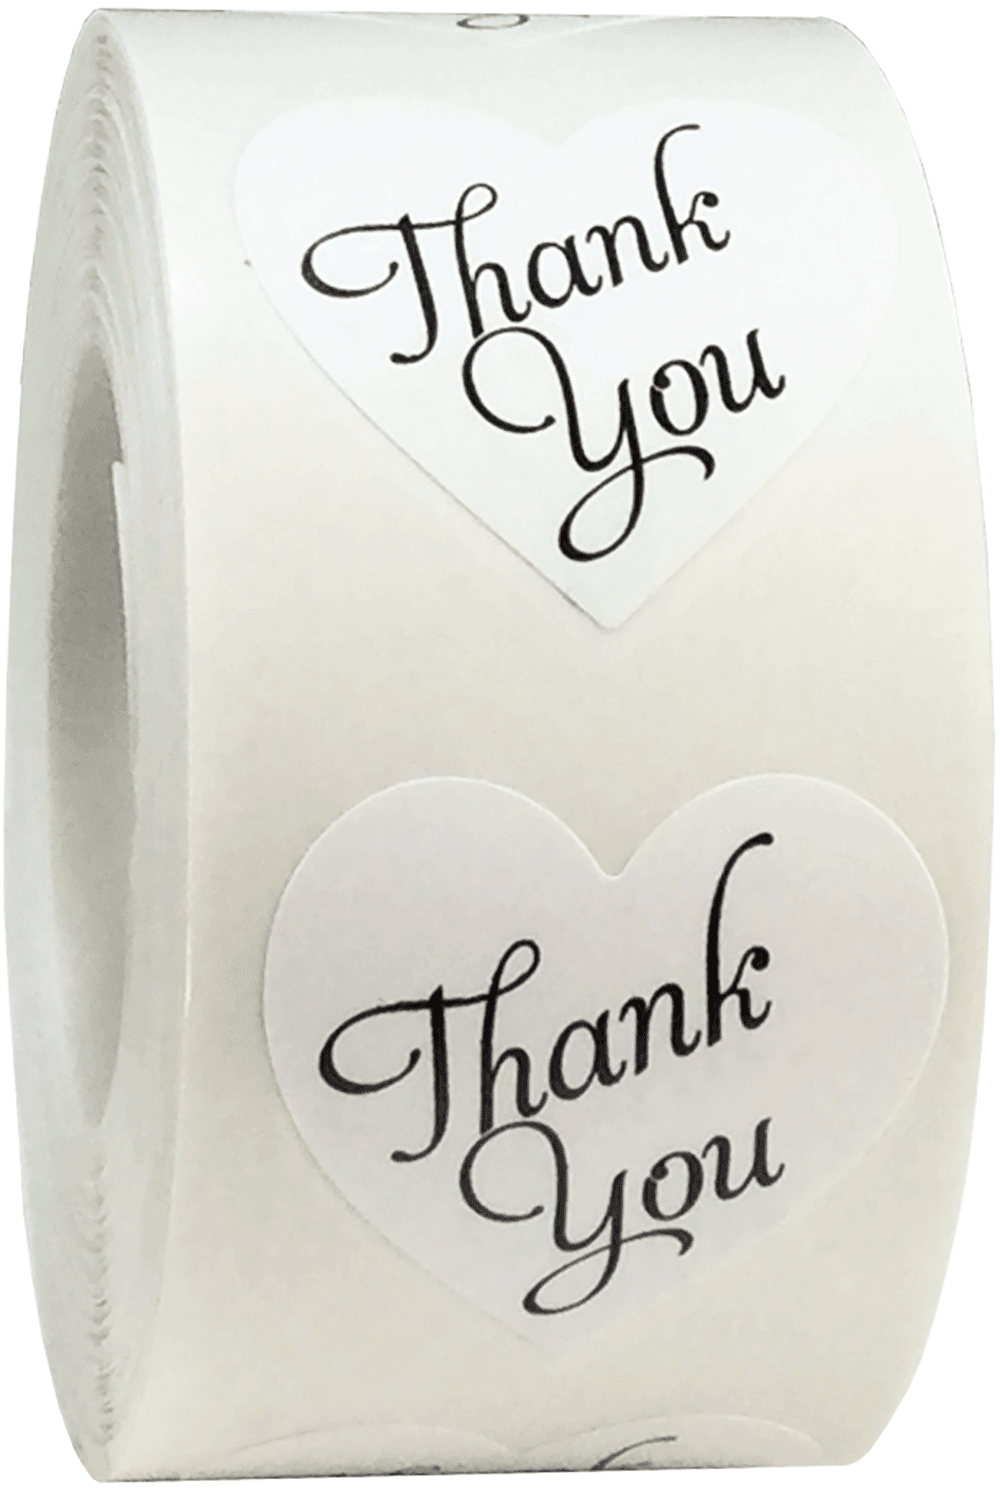 THANK YOU STICKERS SHABBY CHIC HEARTS PERSONALISED GLOSS  WEDDING FAVOUR SEALS 